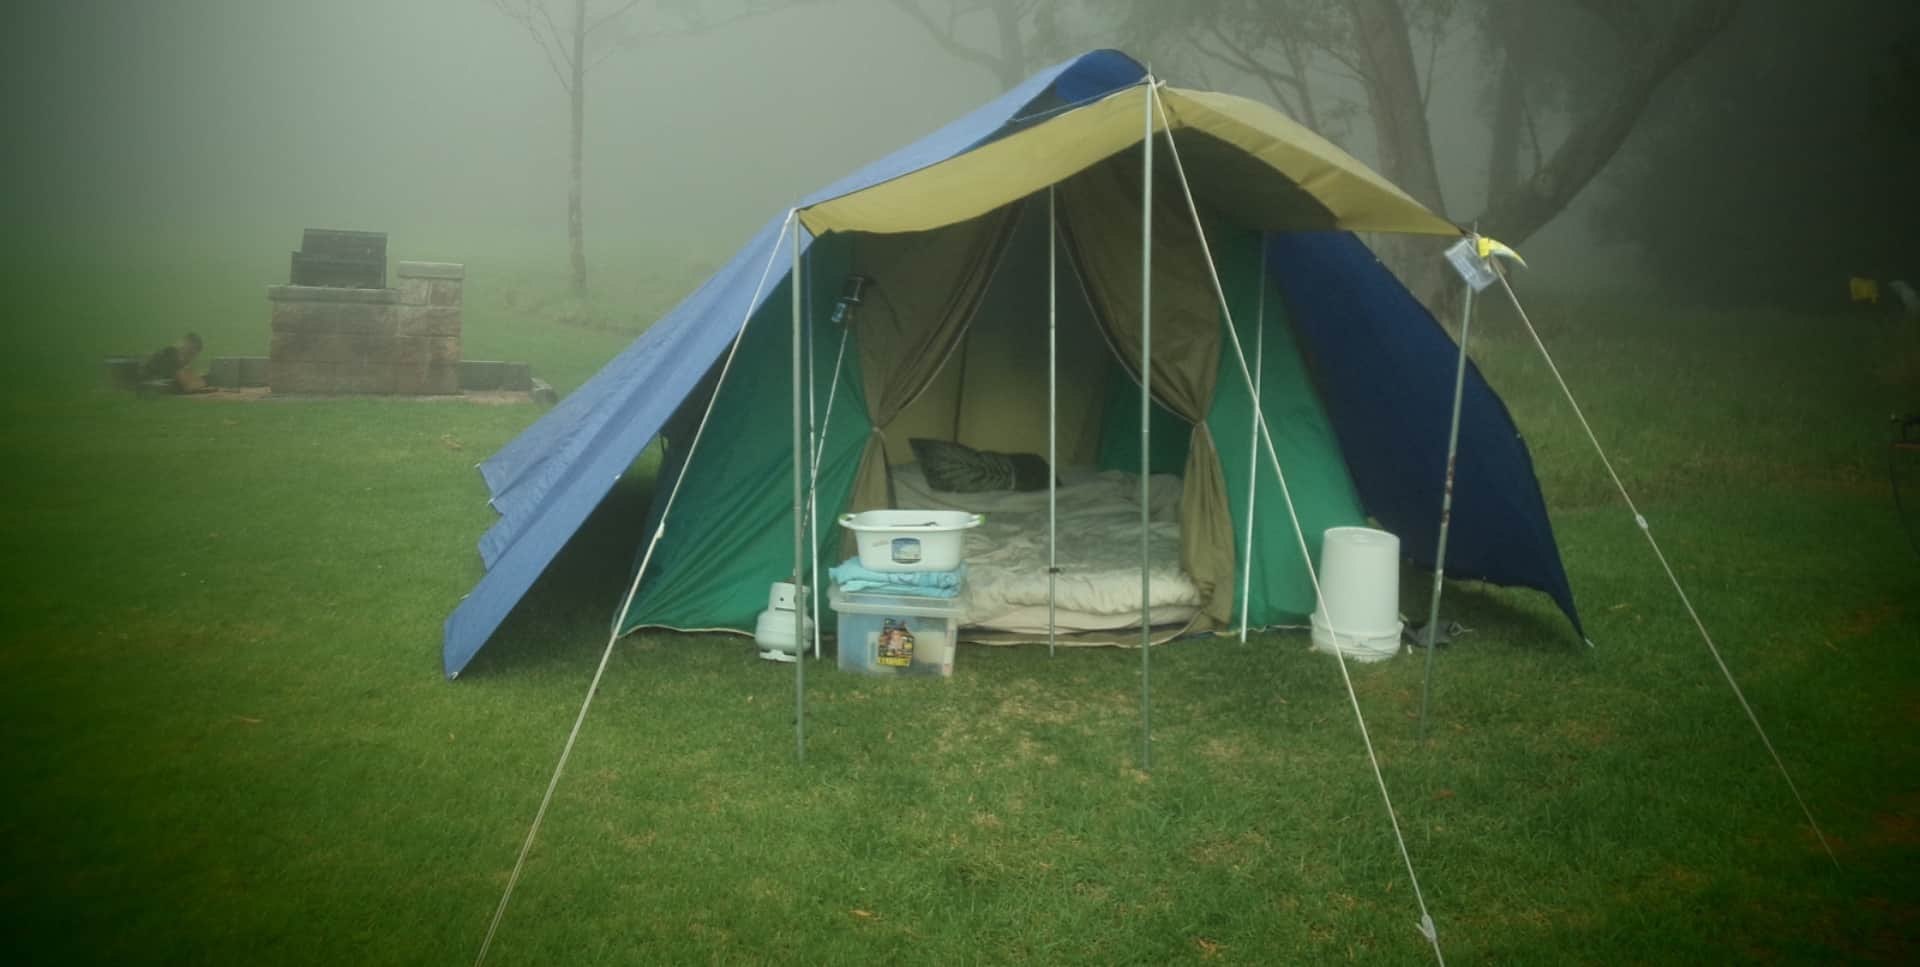 Canvas tent set up in misty weather at a campsite